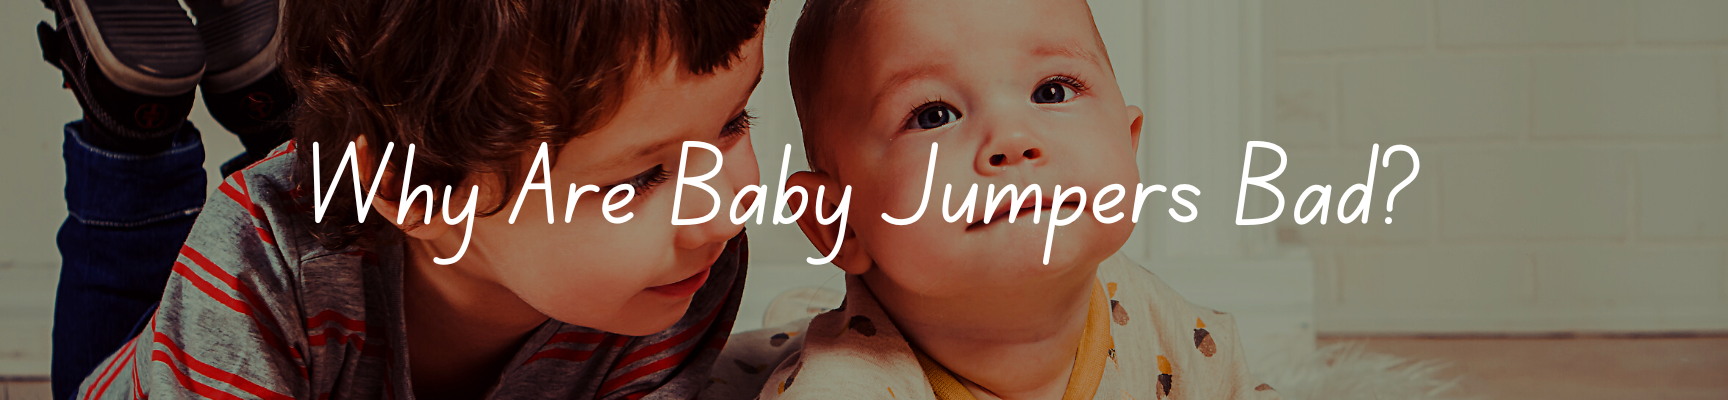 Why Are Baby Jumpers Bad?